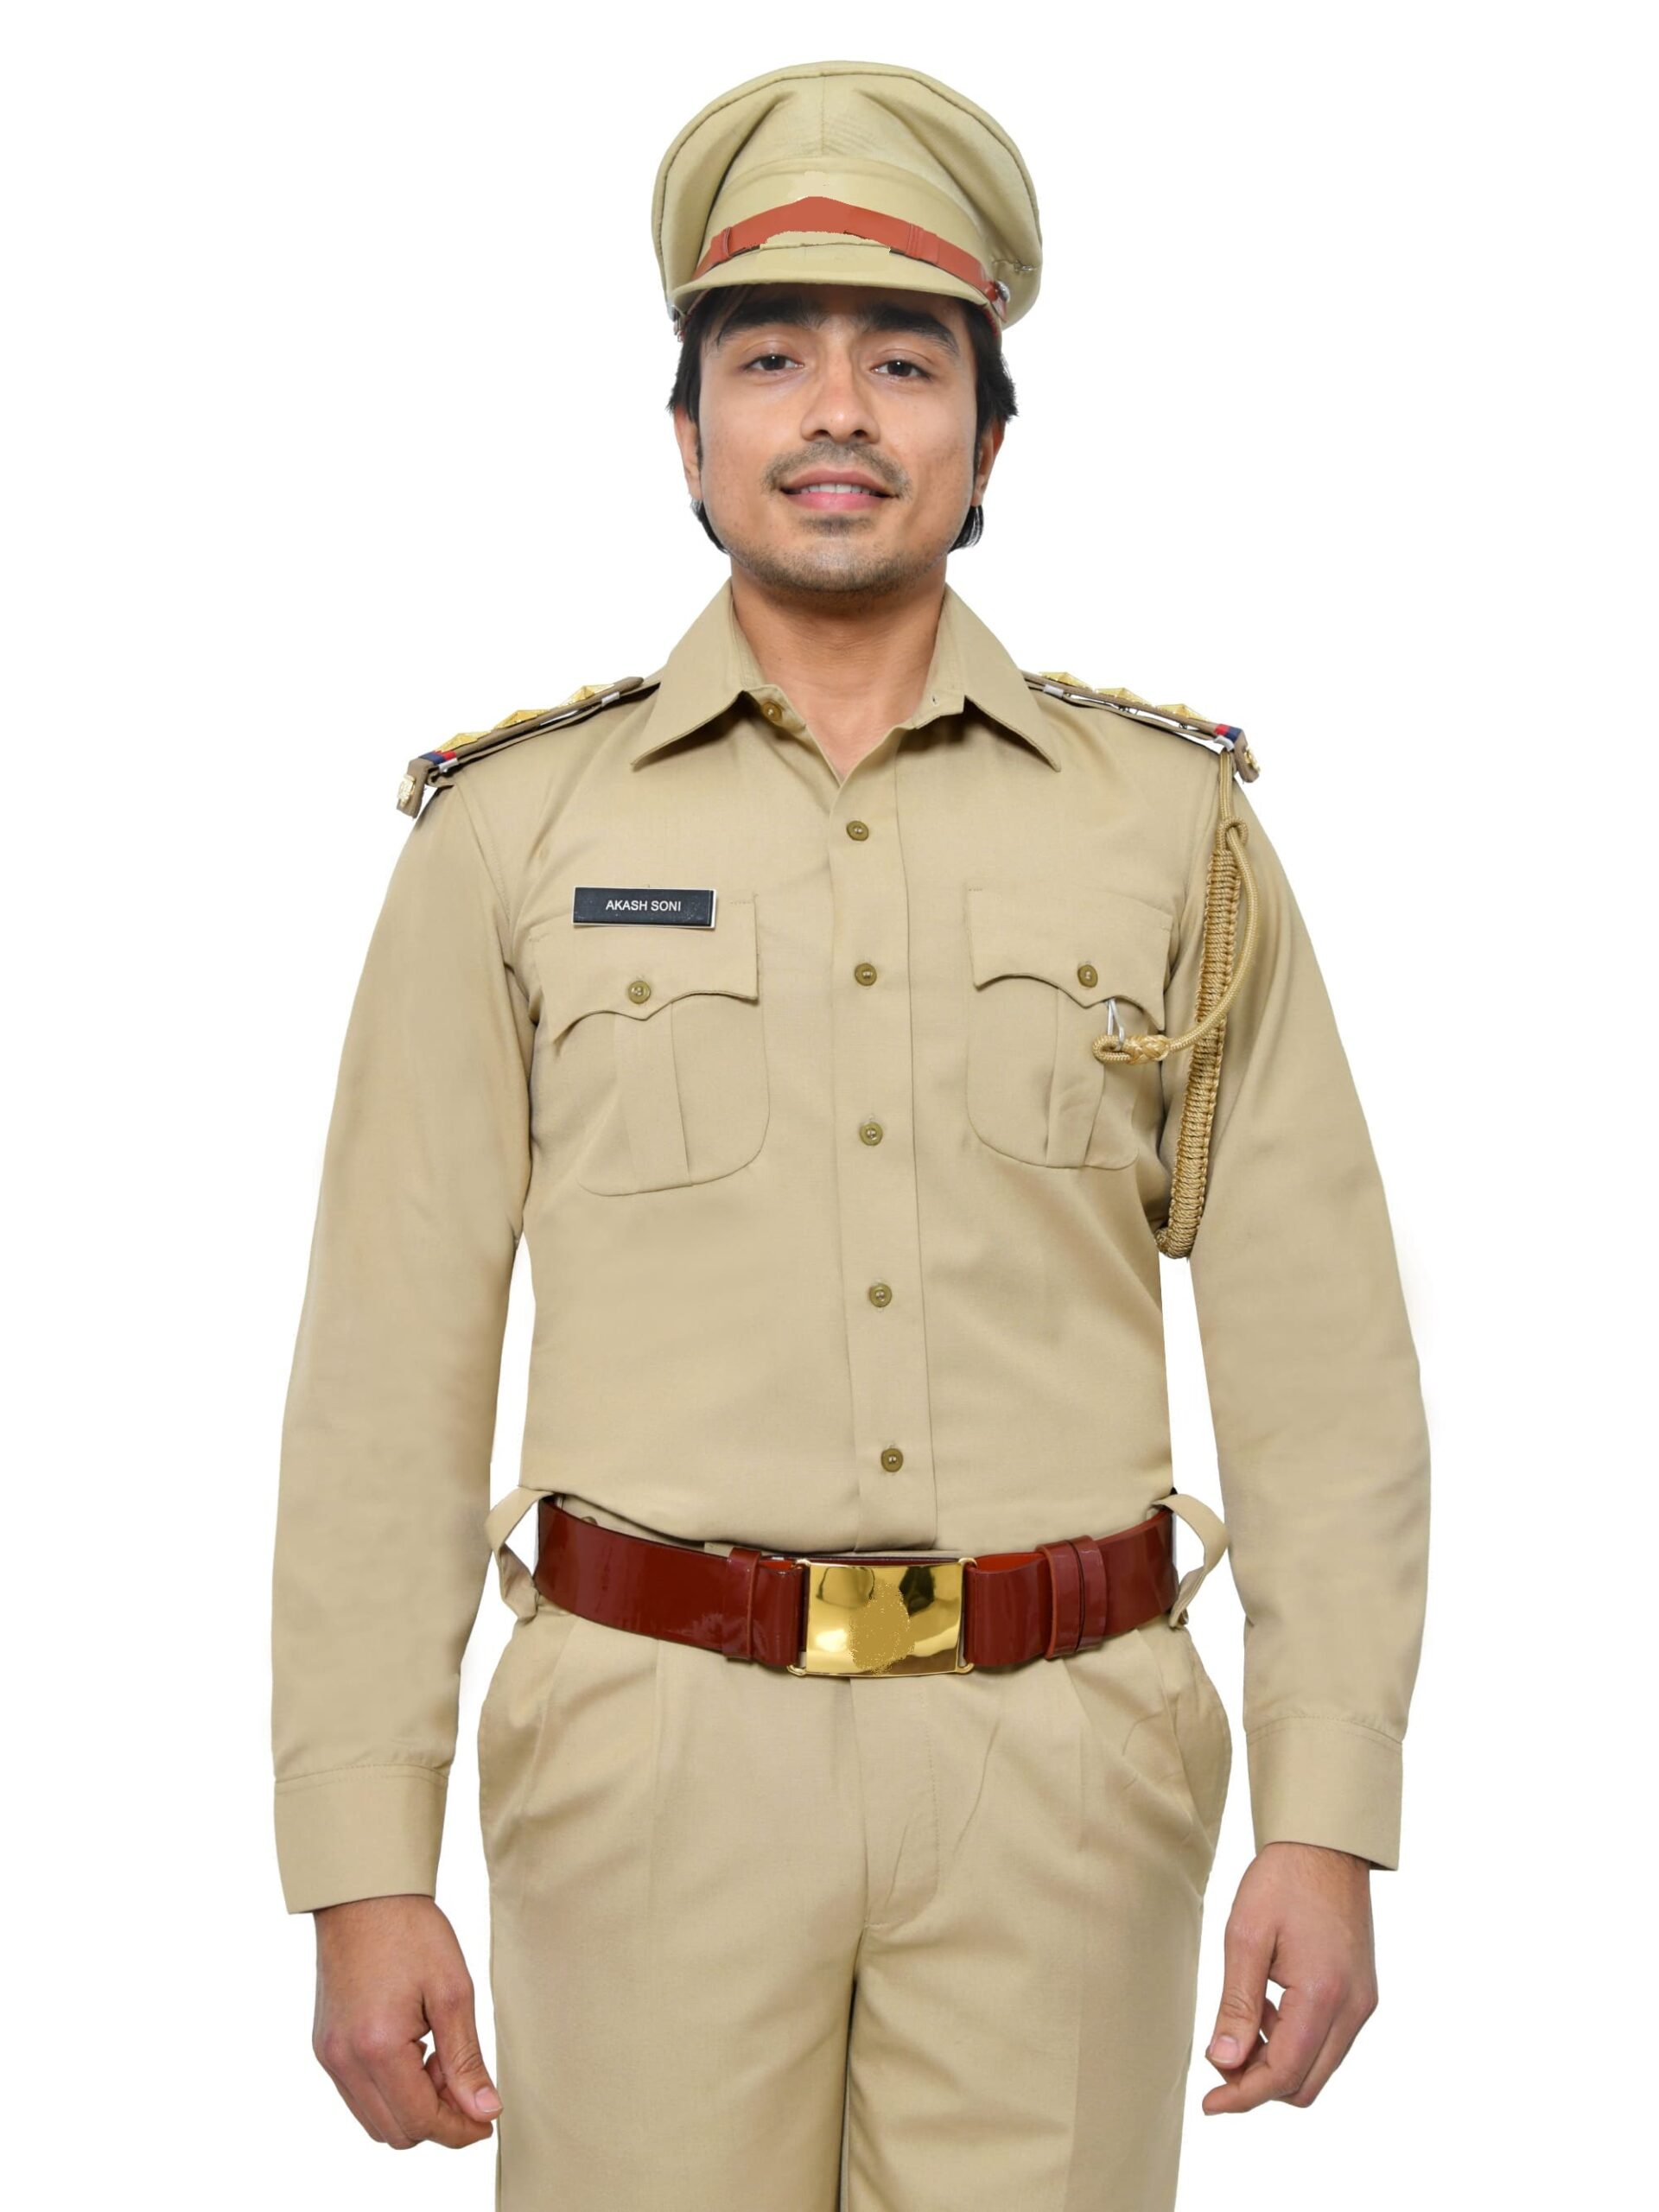 Indian Police Uniforms by Uniformer